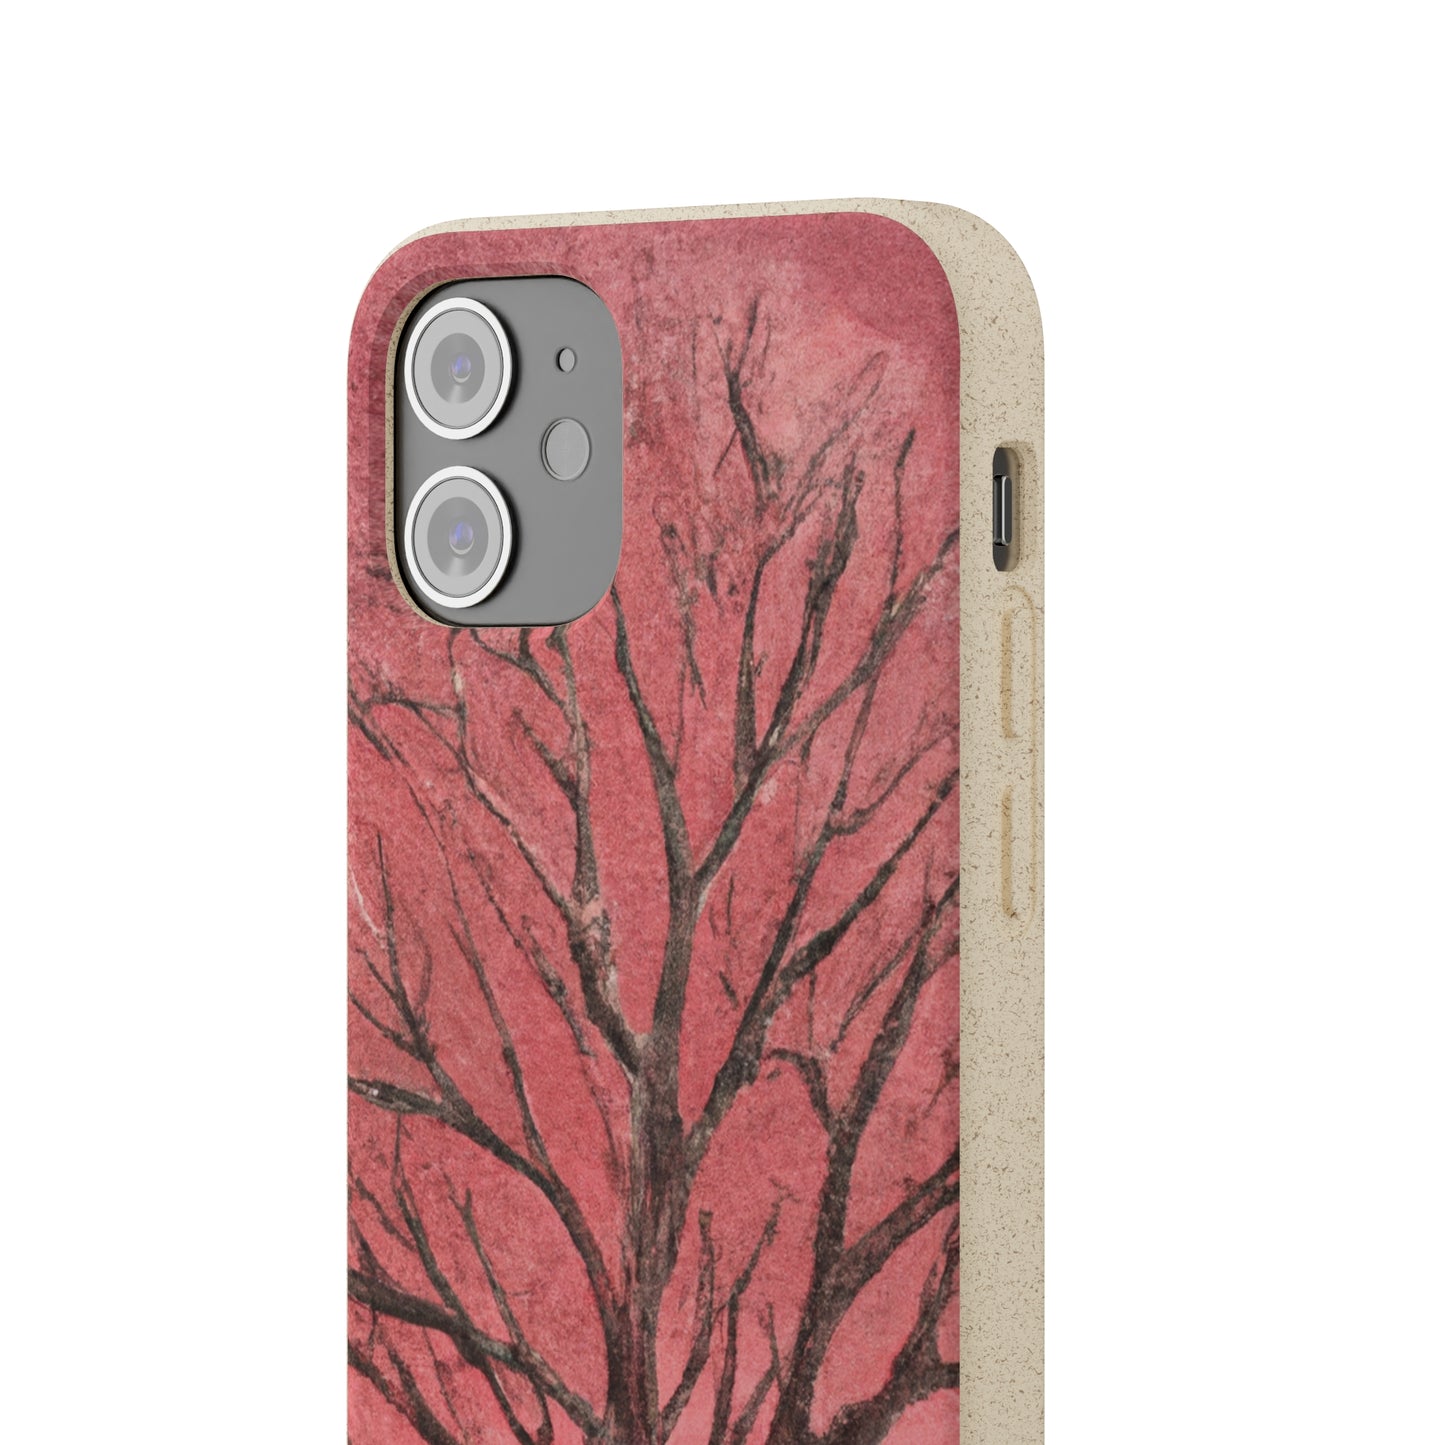 "Enchanting Nature: A Vibrant Color Story" - Bam Boo! Lifestyle Eco-friendly Cases